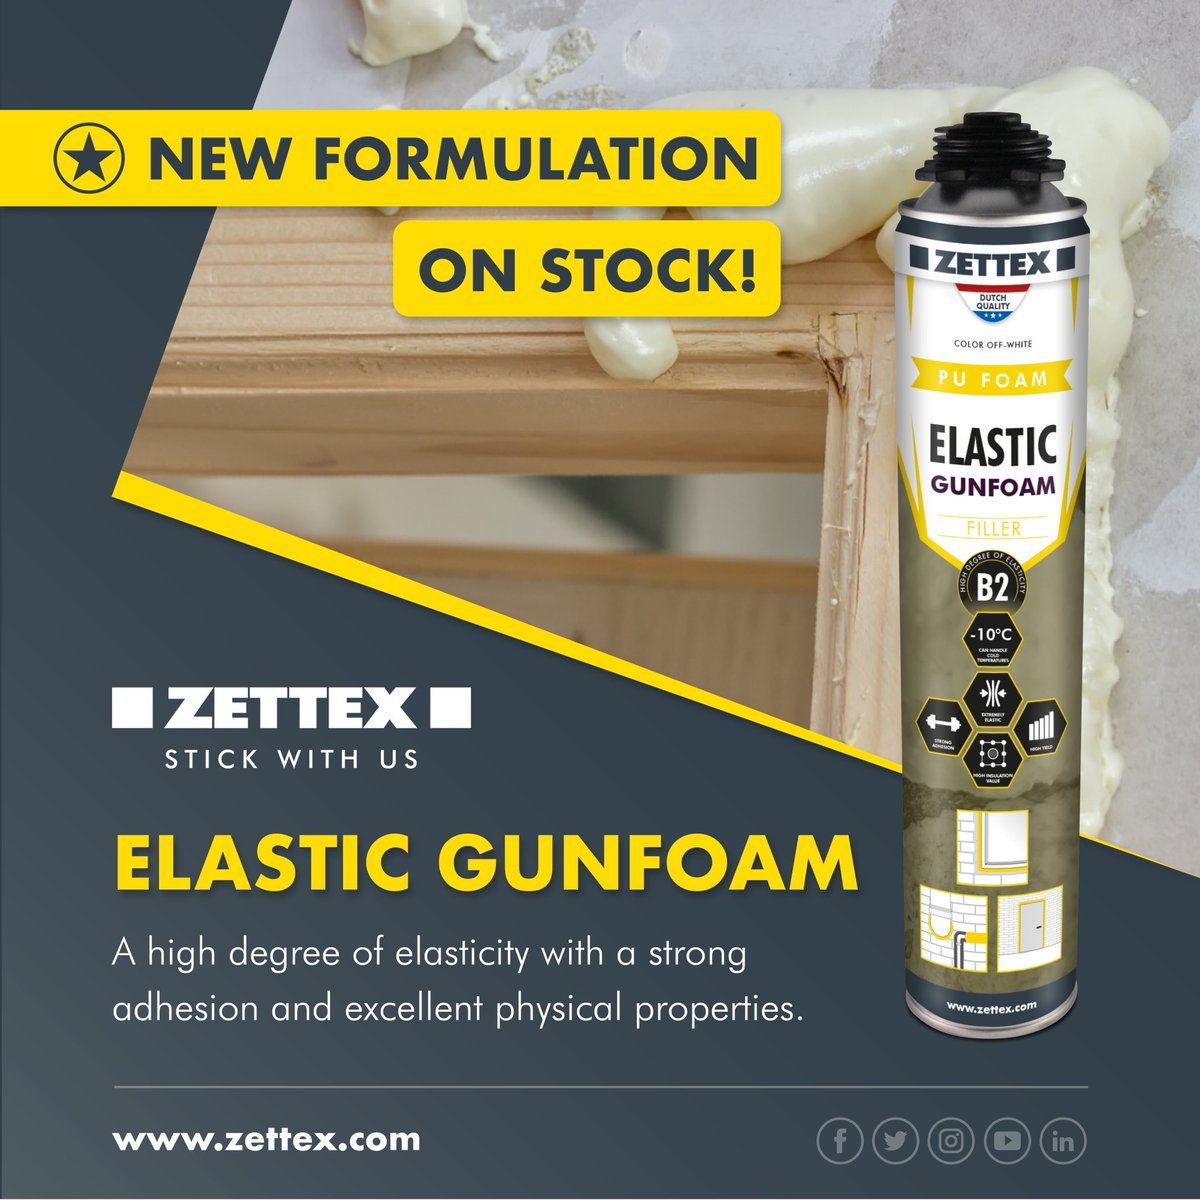 After a long period of developing and testing, we can proudly announce that our Elastic Gunfoam has significantly improved. However, we kept its price stable. #zettex #zettexeuropebv #flexfoam #pur #elasticfoam #pufoam #pur #polyurethane #polyurethanefoam #sealants #adhesives